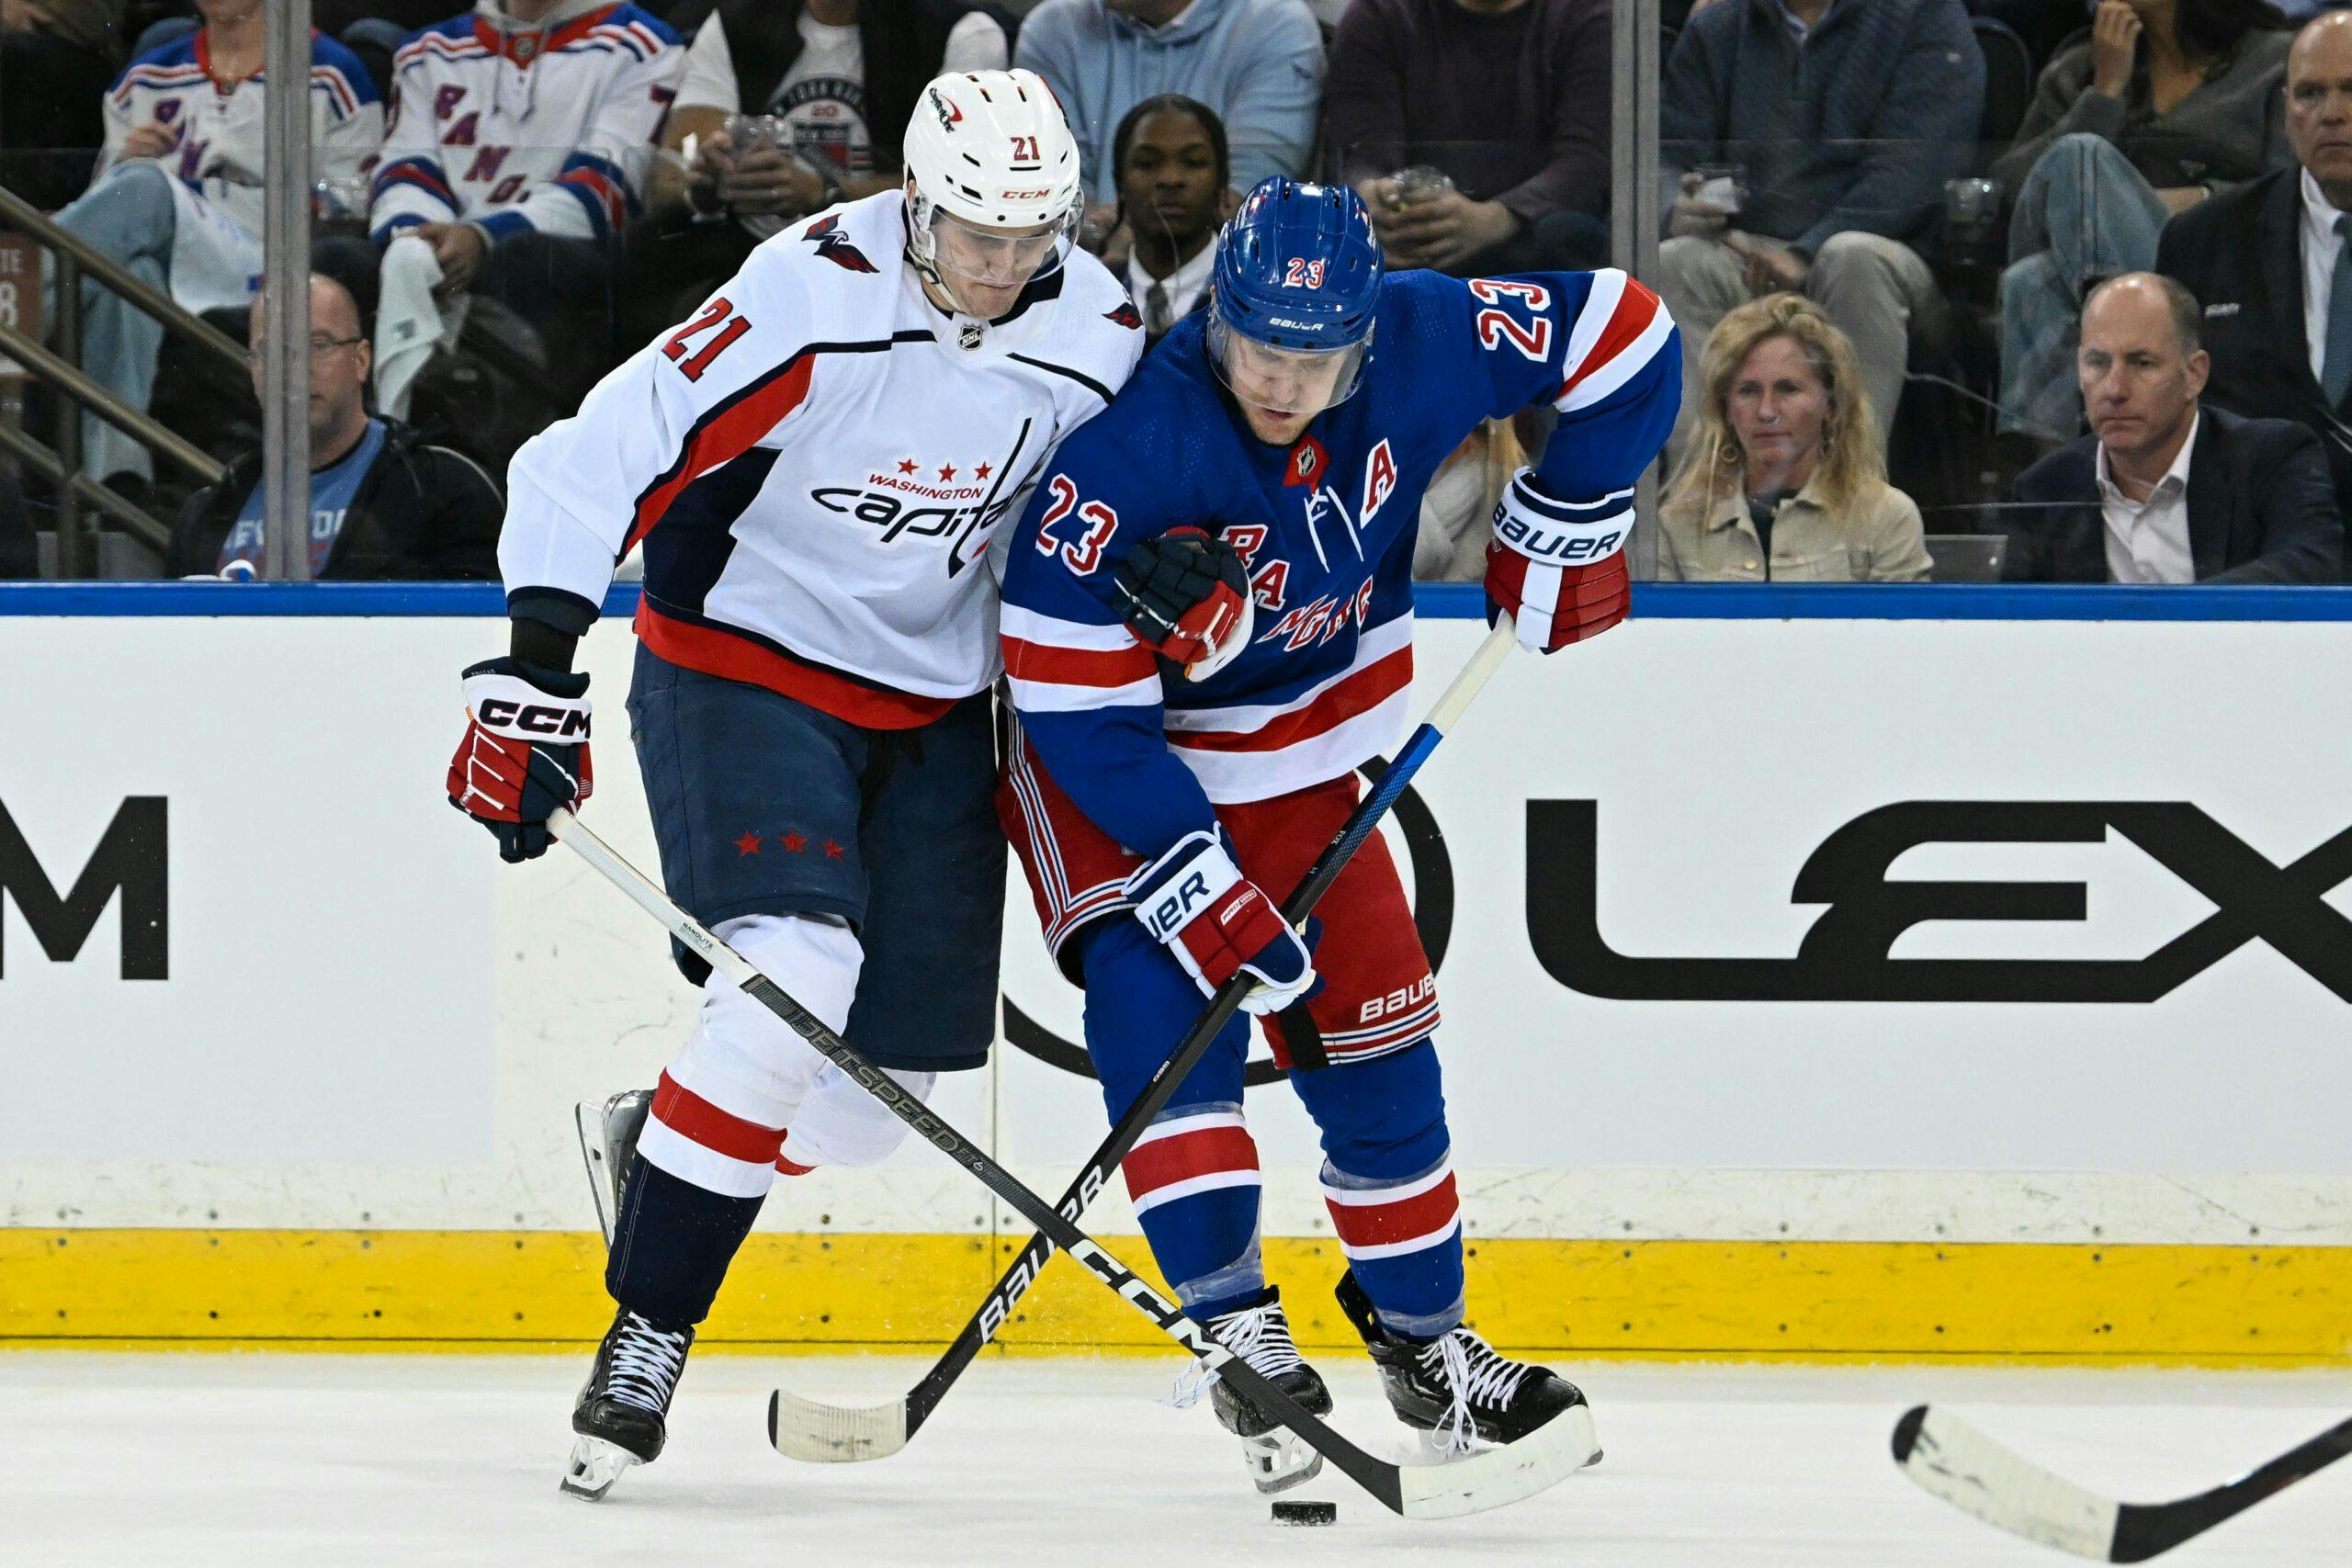 The Washington Capitals aren’t going to back down despite 2-0 series deficit to Rangers